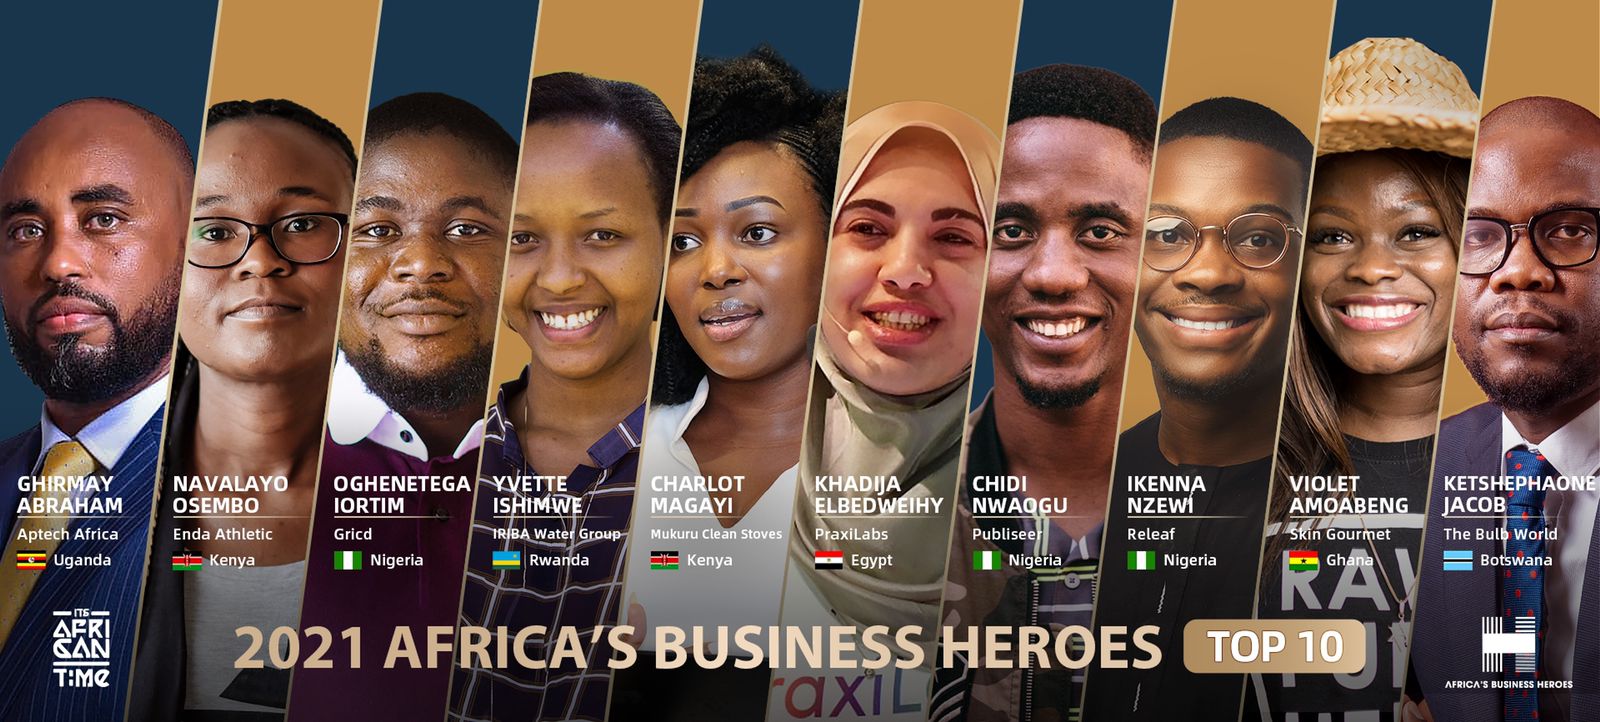 PraxiLabs Ranks among Africa’s Top 10 Business Heroes